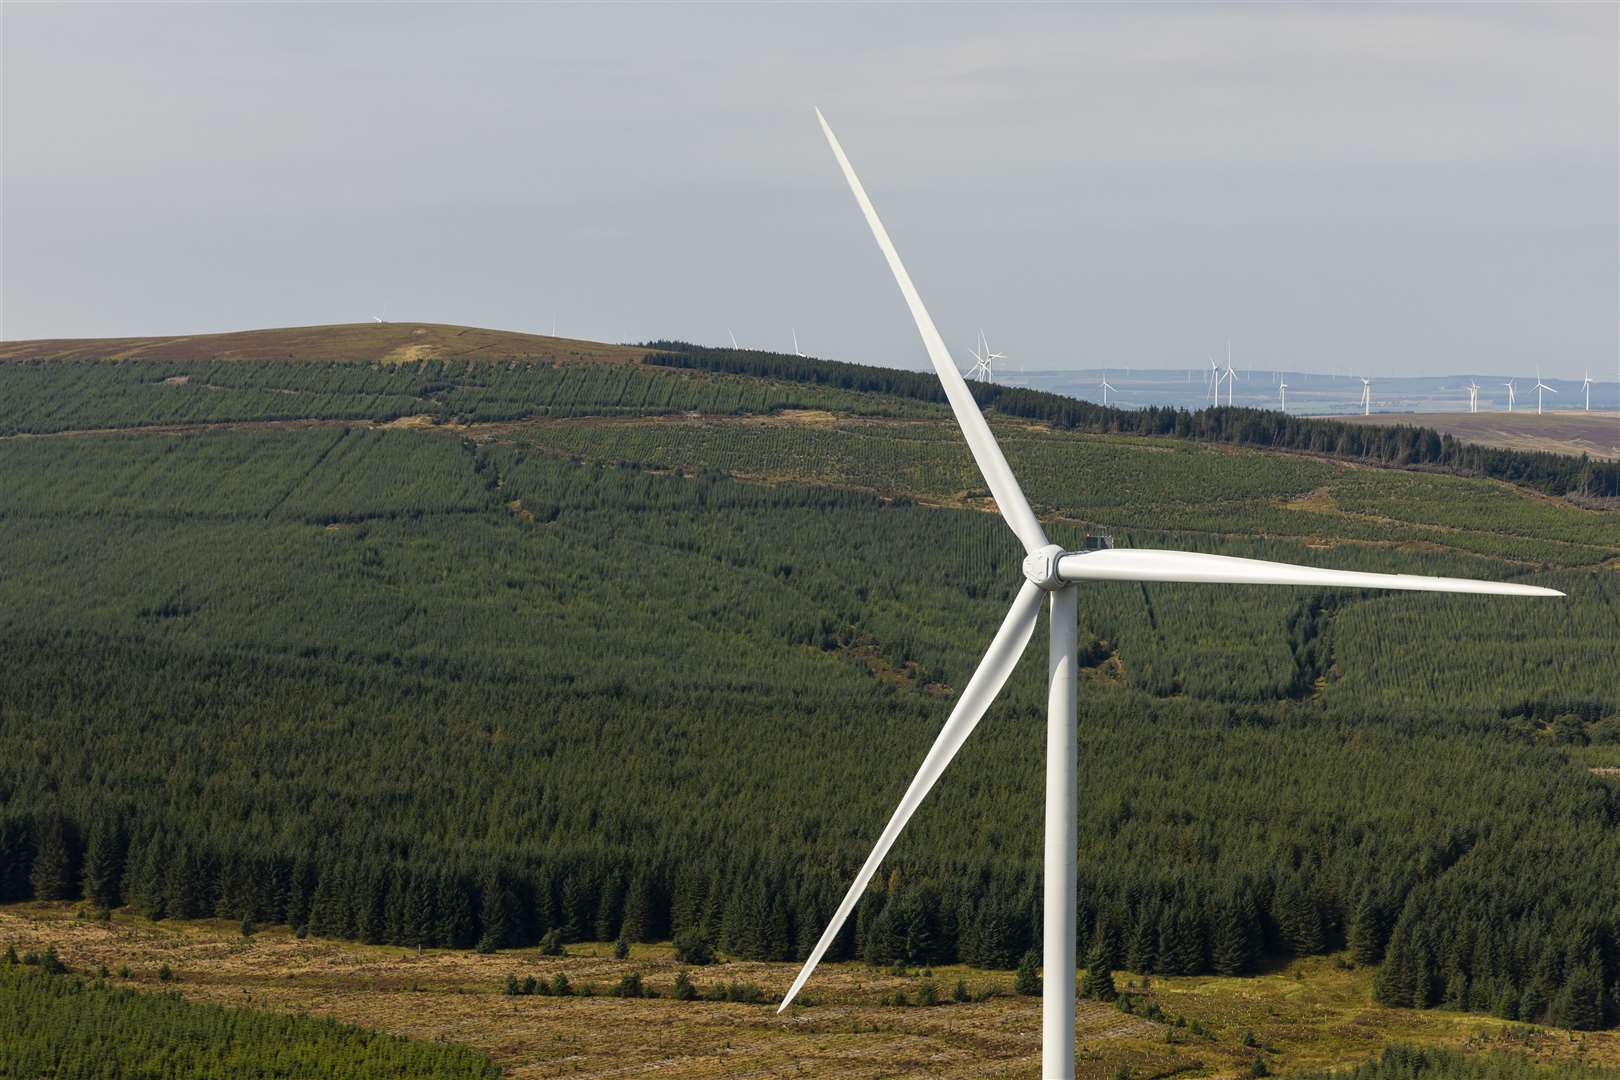 Could communities be about to see greater benefit from renewable energy schemes?